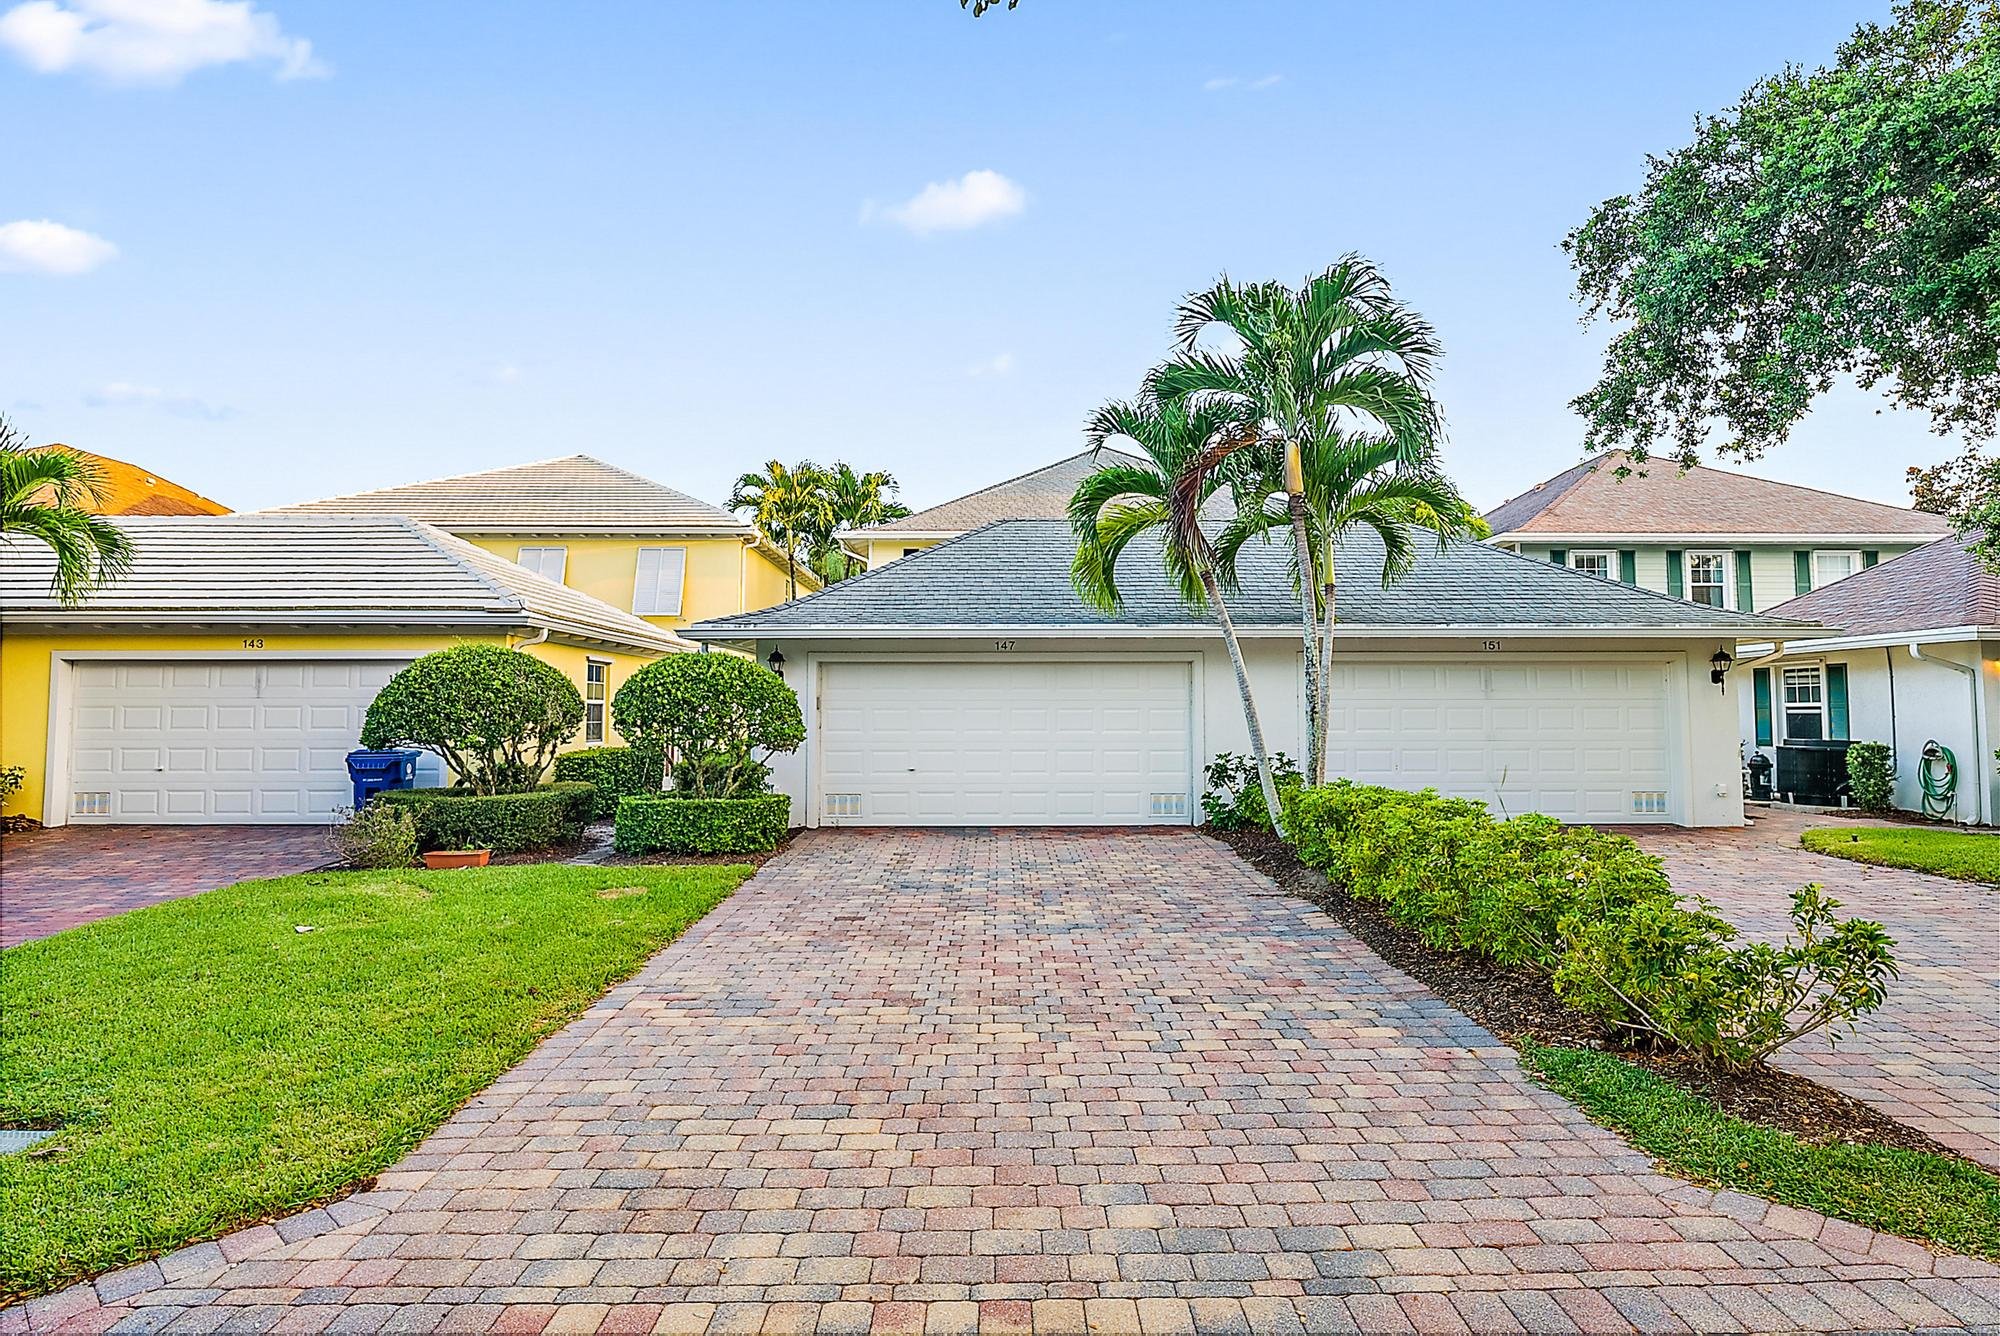 home for sale in abacoa in jupiter florida by top rated real estate company